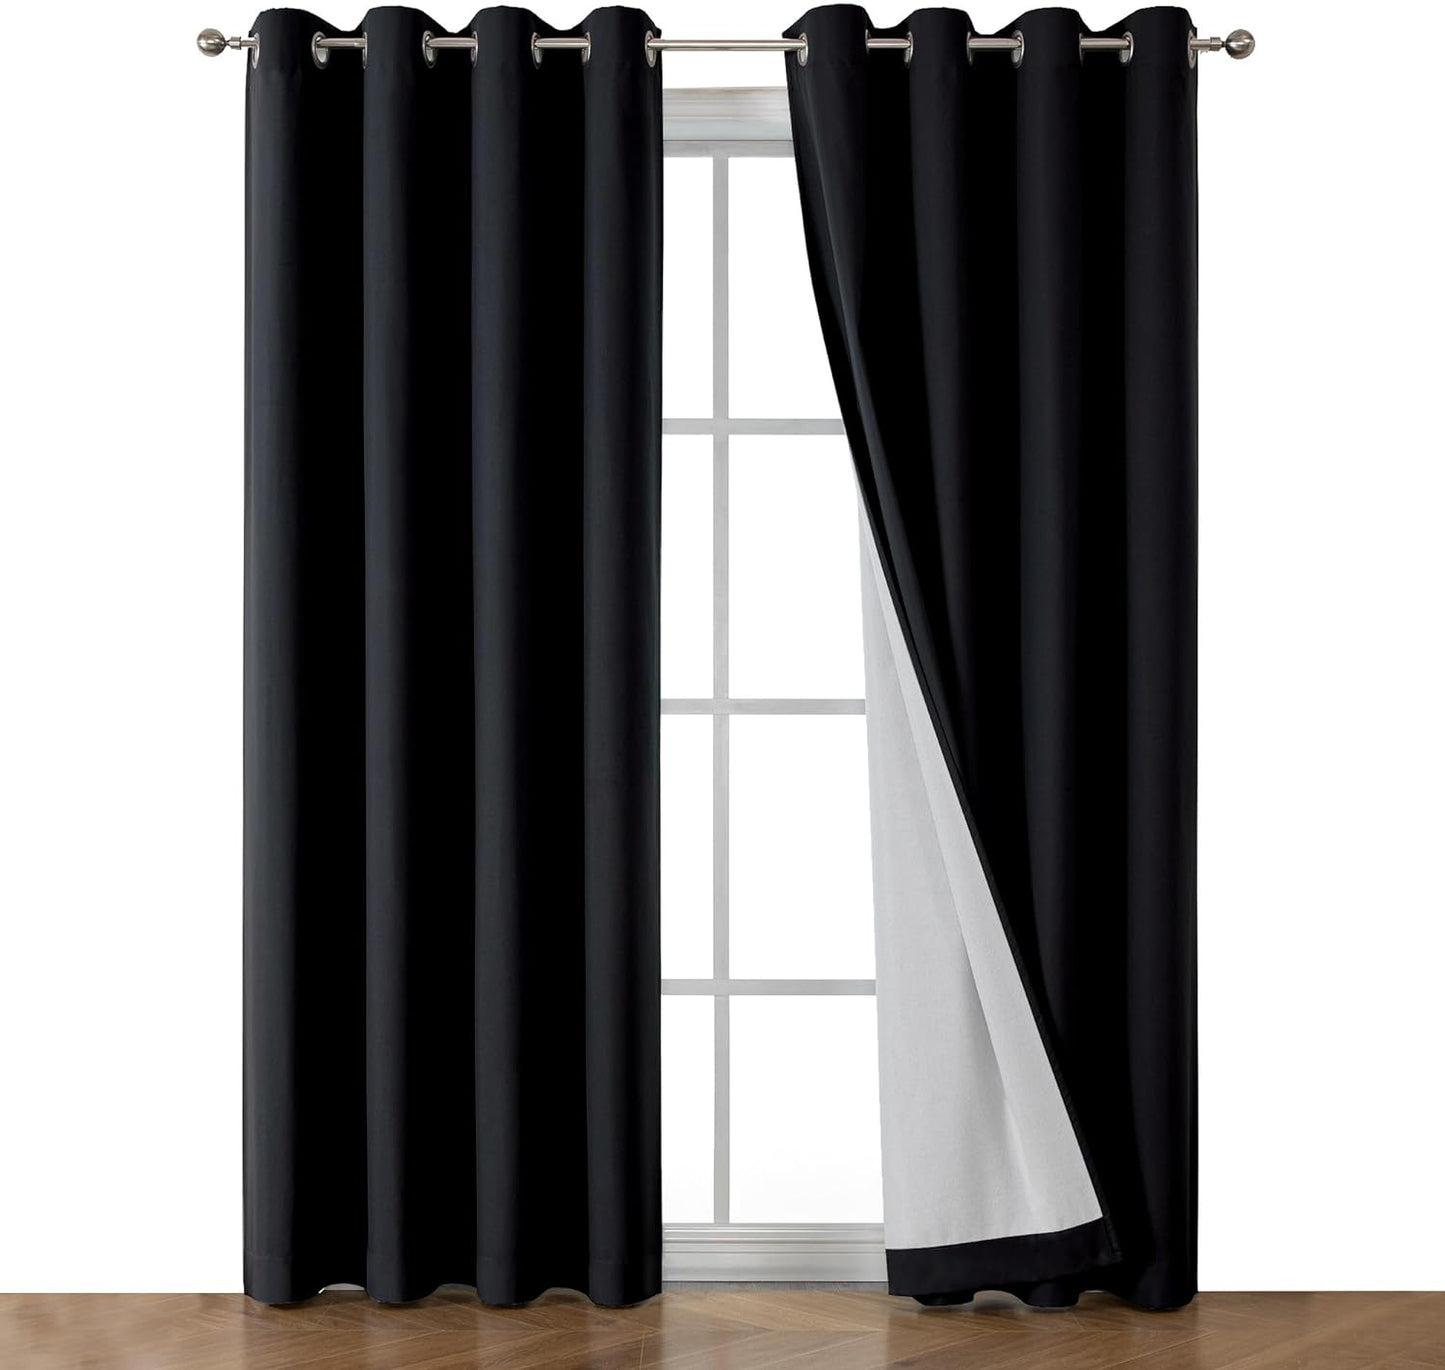 OWENIE Maya 100% Blackout Curtains 84 Inch Length 2 Panels Set, Greyish White Solid Heavy Thermal Insulated Grommets Curtains for Bedroom & Living Room, 2 Panels (Each 52 W X 84 L,Greyish White)  OWENIE Black 52W X 96L 